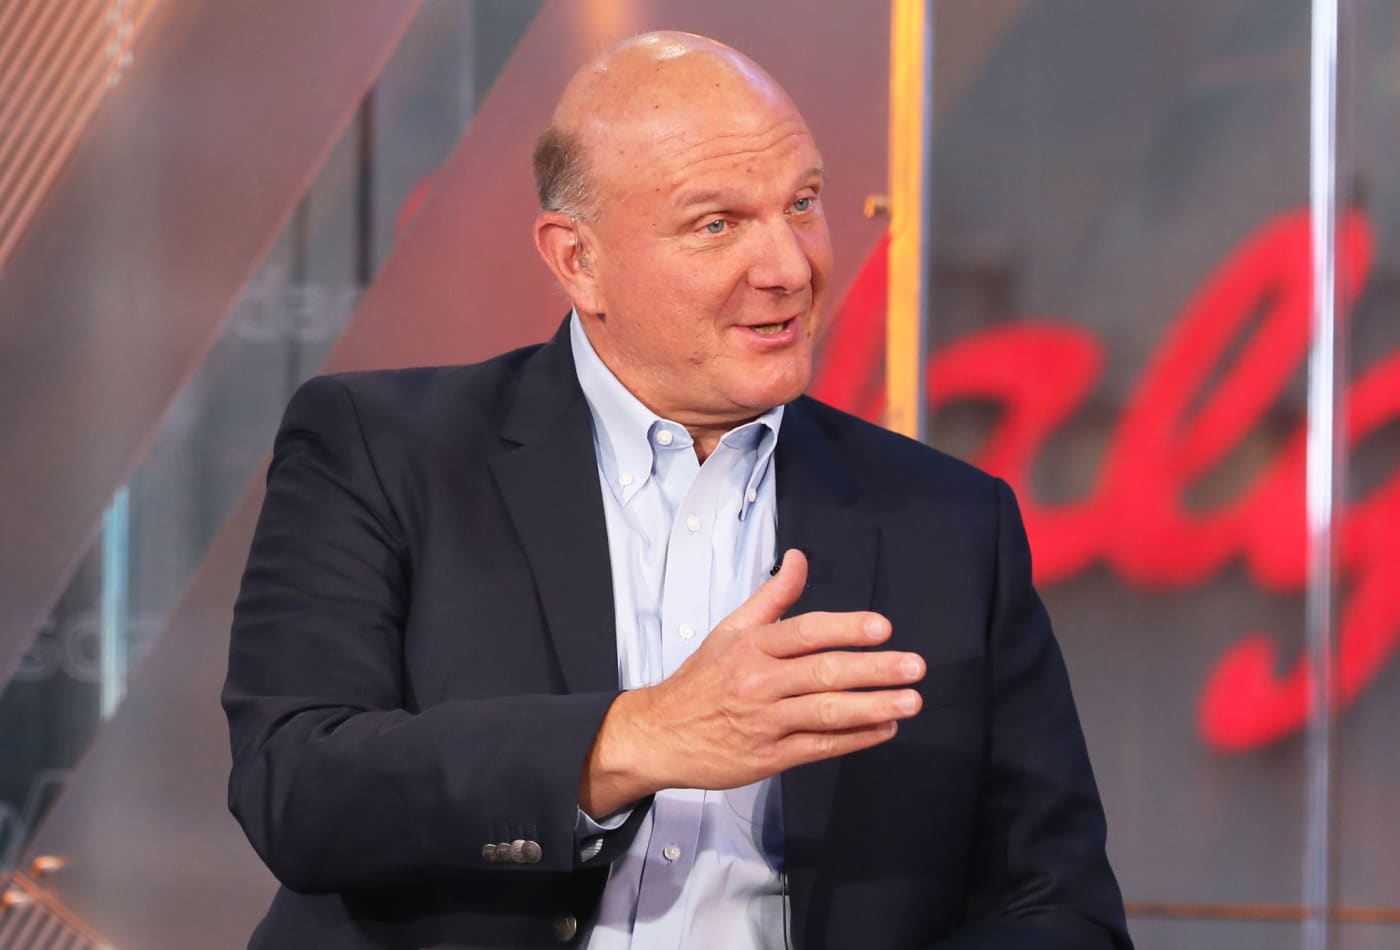 Billionaire Steve Ballmer started out making only $50,000 at Microsoft